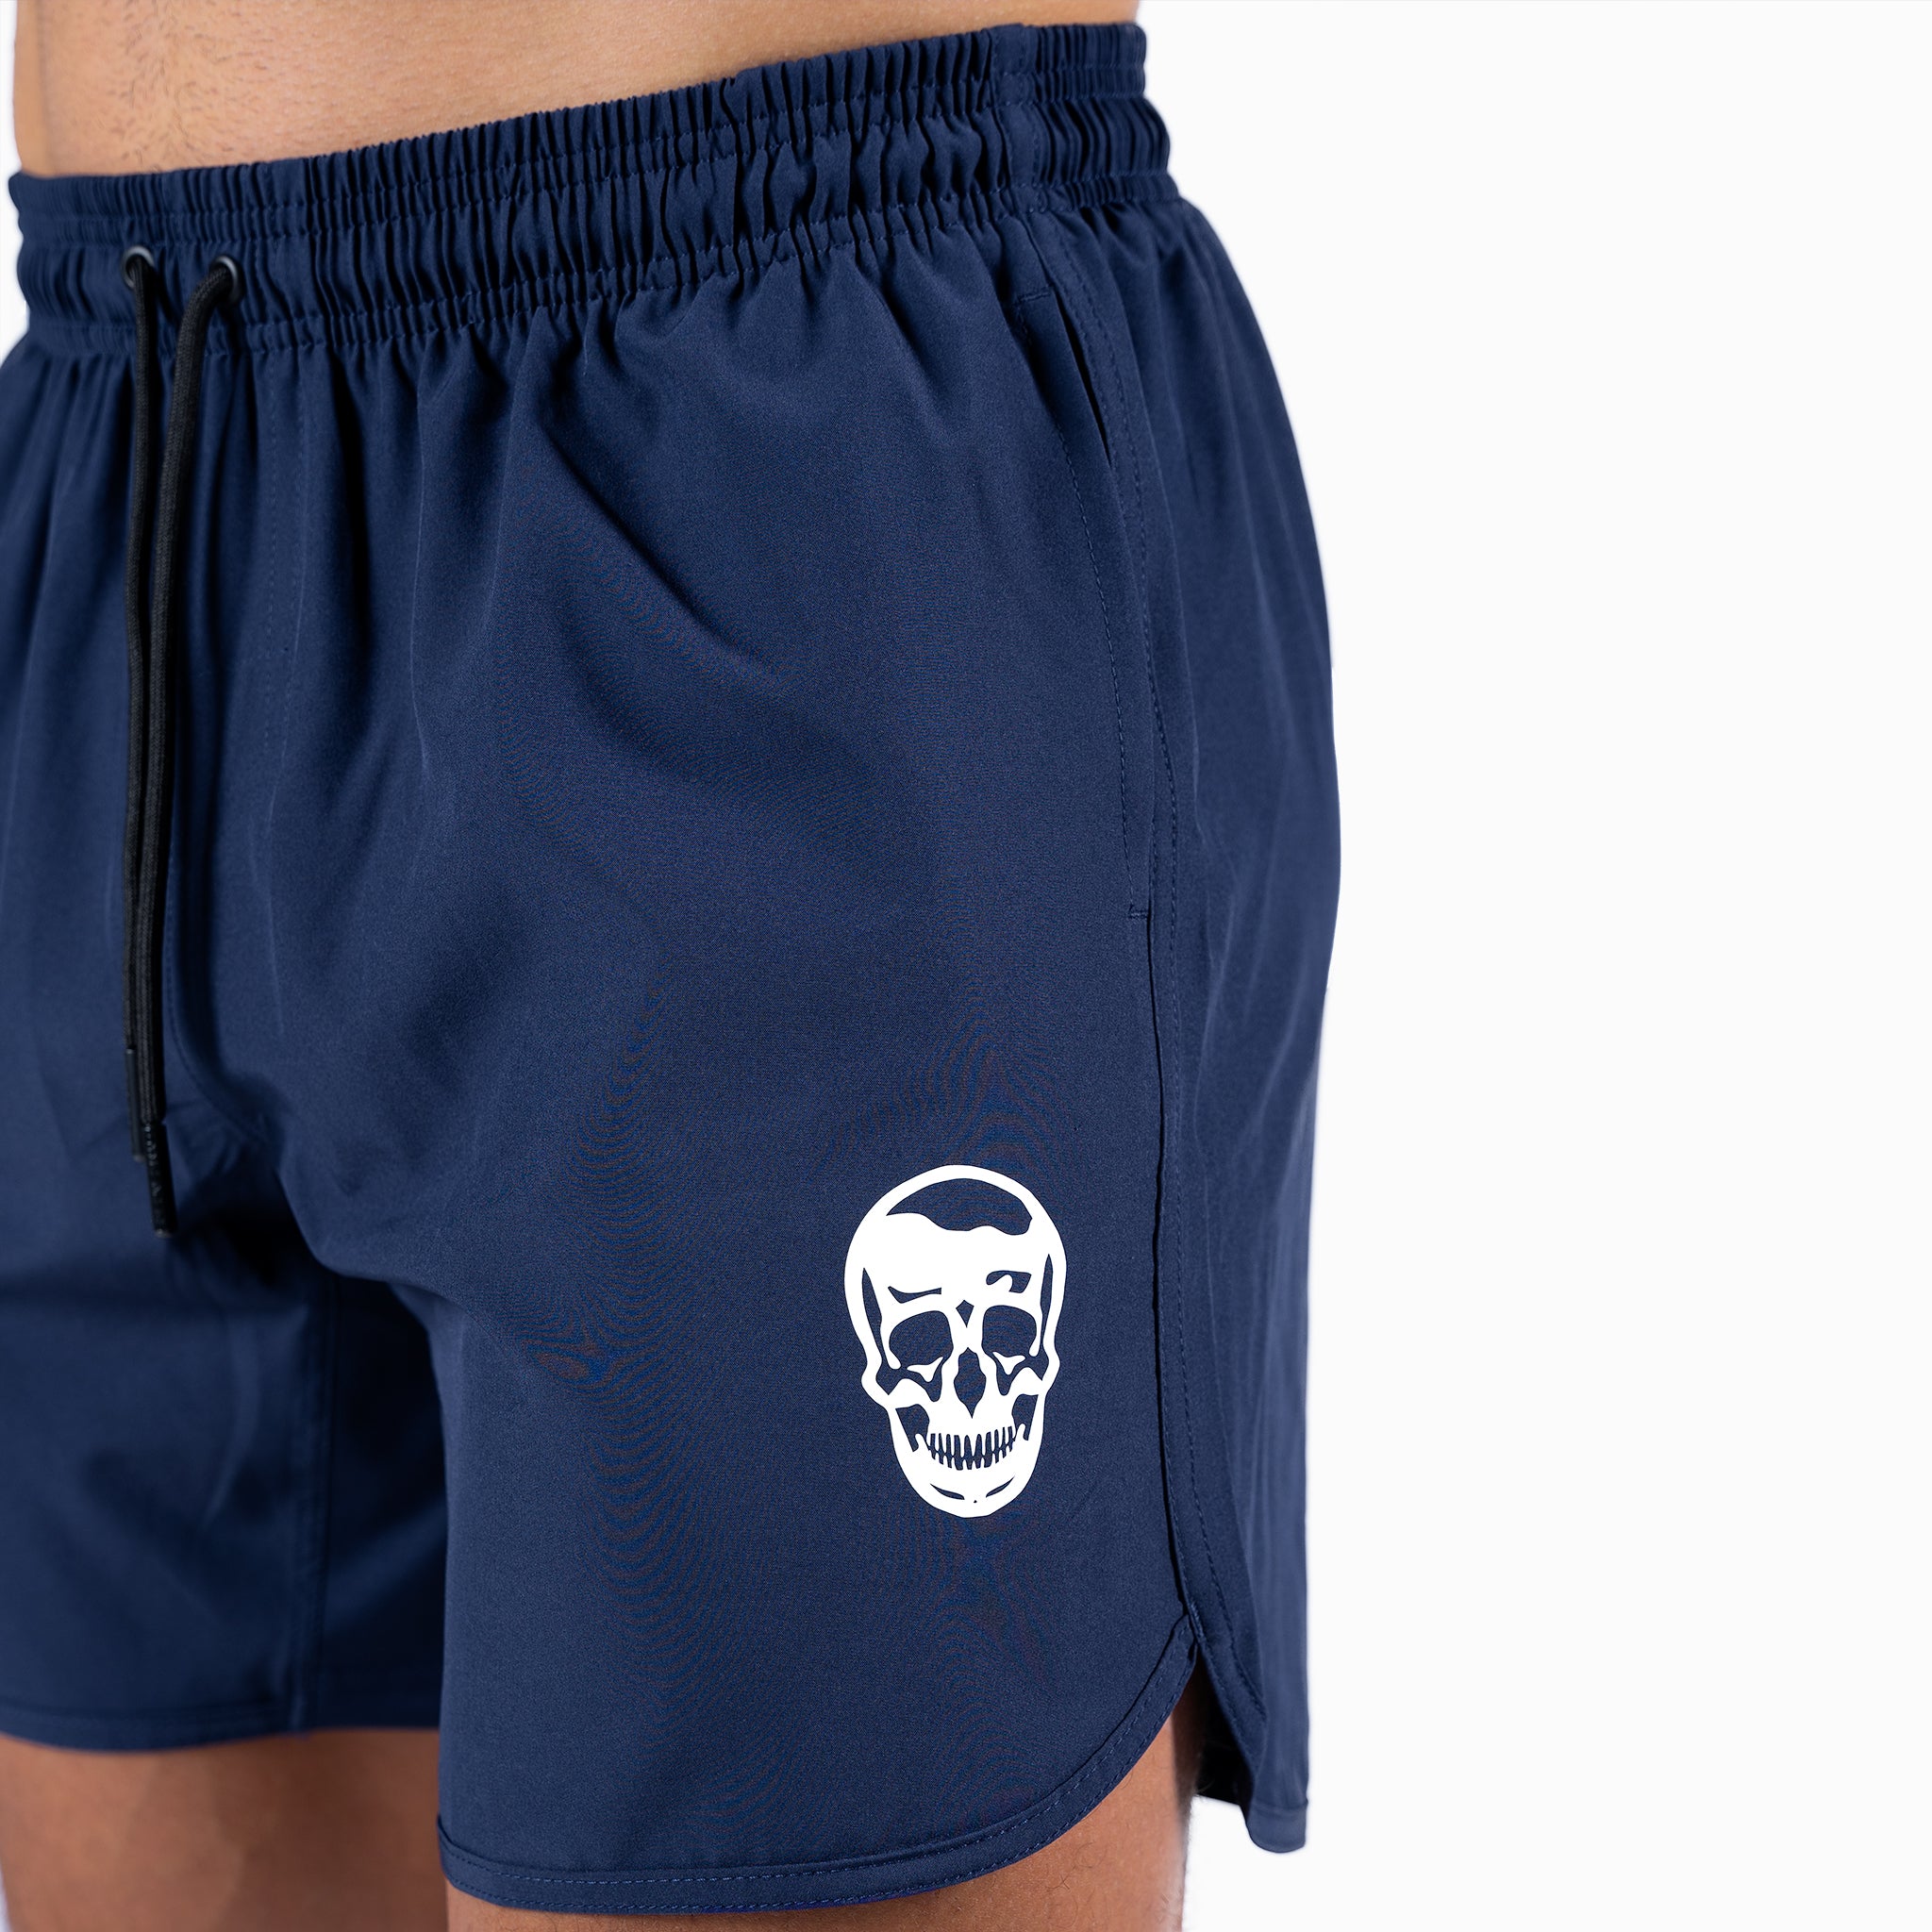 gymreapers training shorts